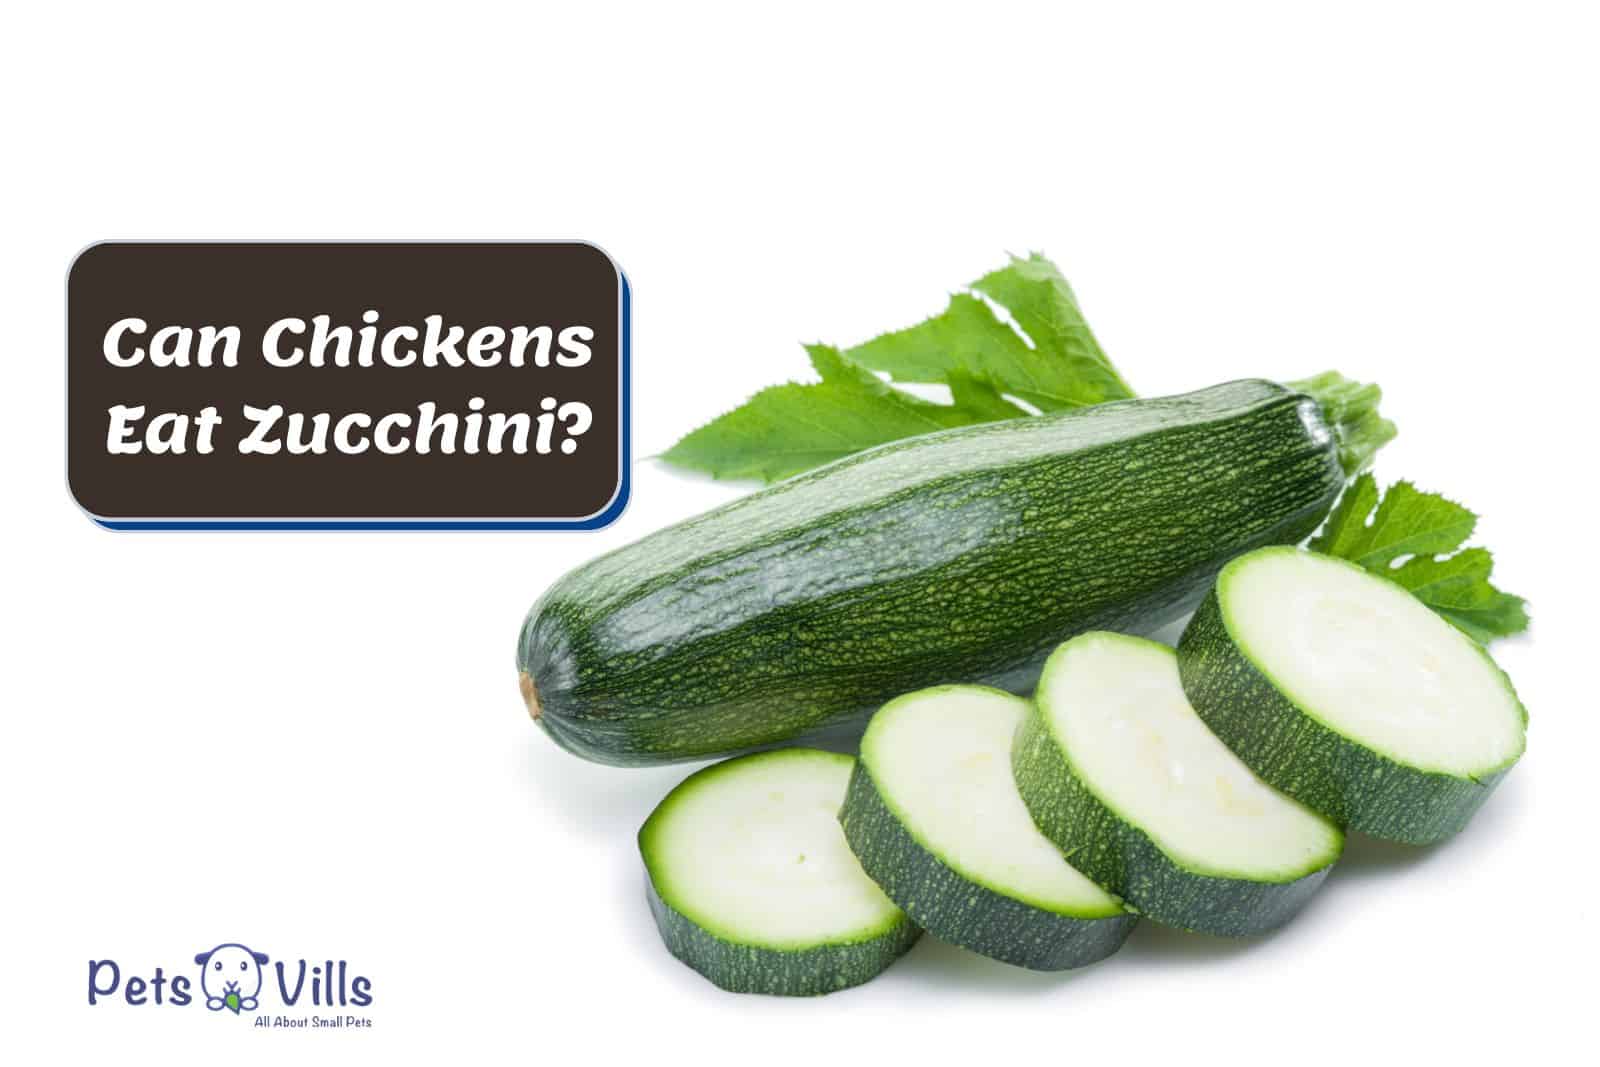 slices of Zucchini; Can Chickens Eat Zucchini?